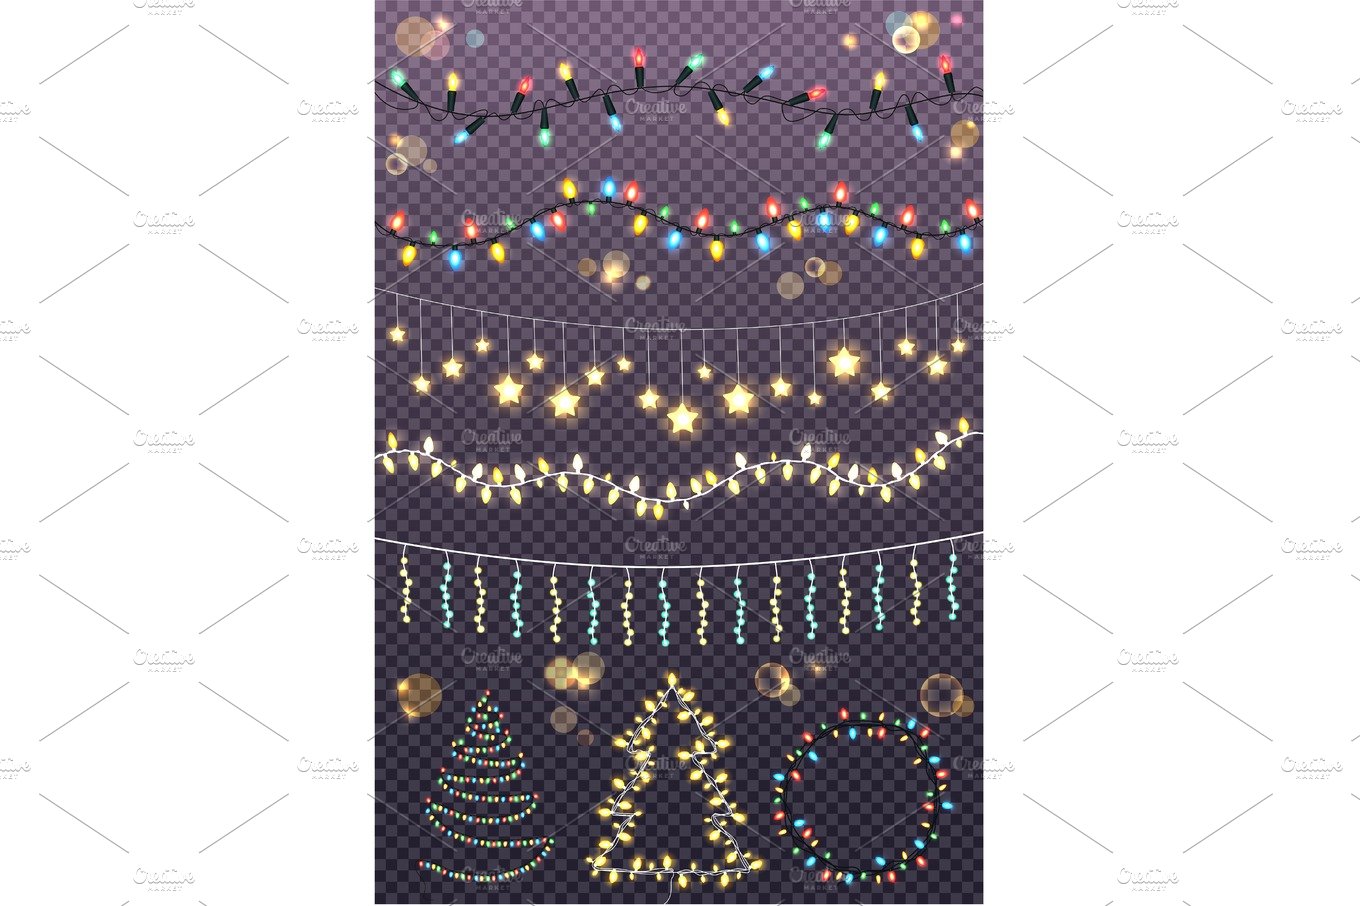 Garland Ropes Set and Figures of Christmas Tree cover image.